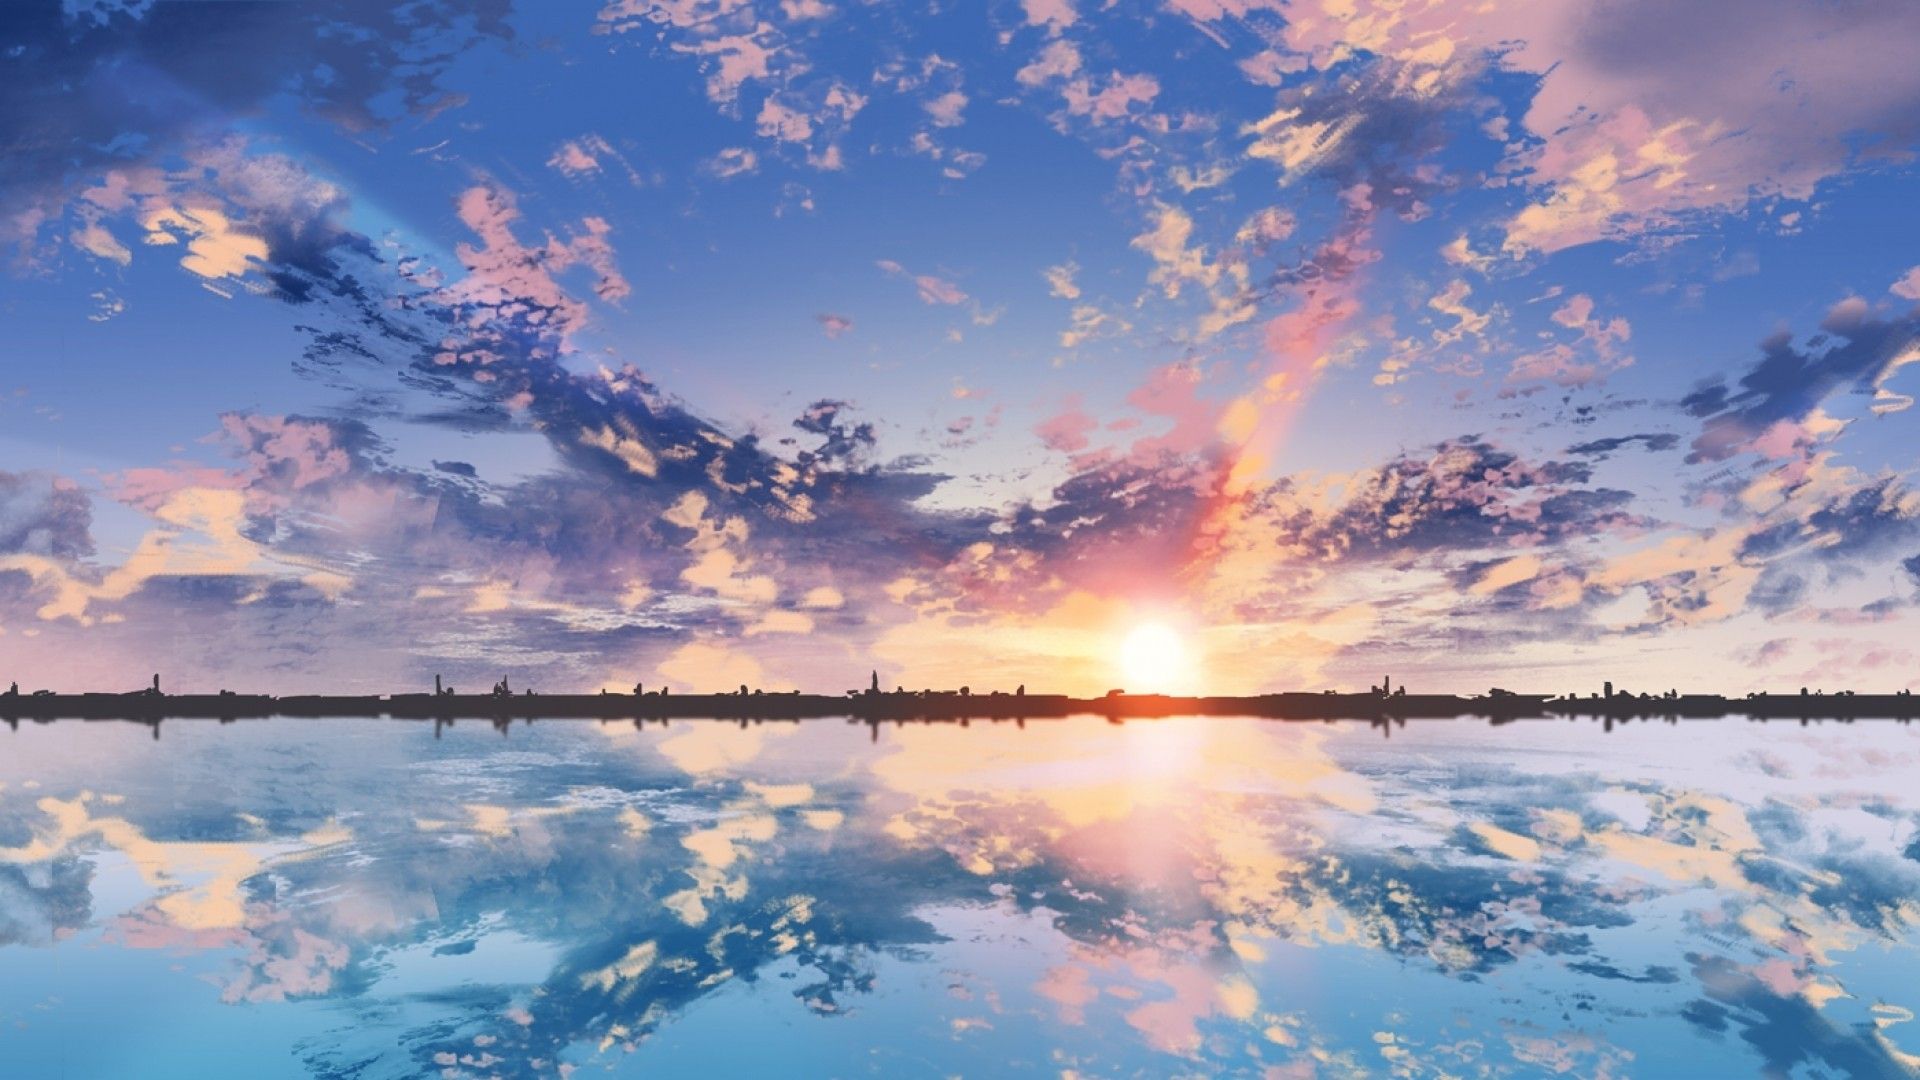 Download 1920x1080 Anime Scenic, Clouds, Sunset, Reflection, Dual